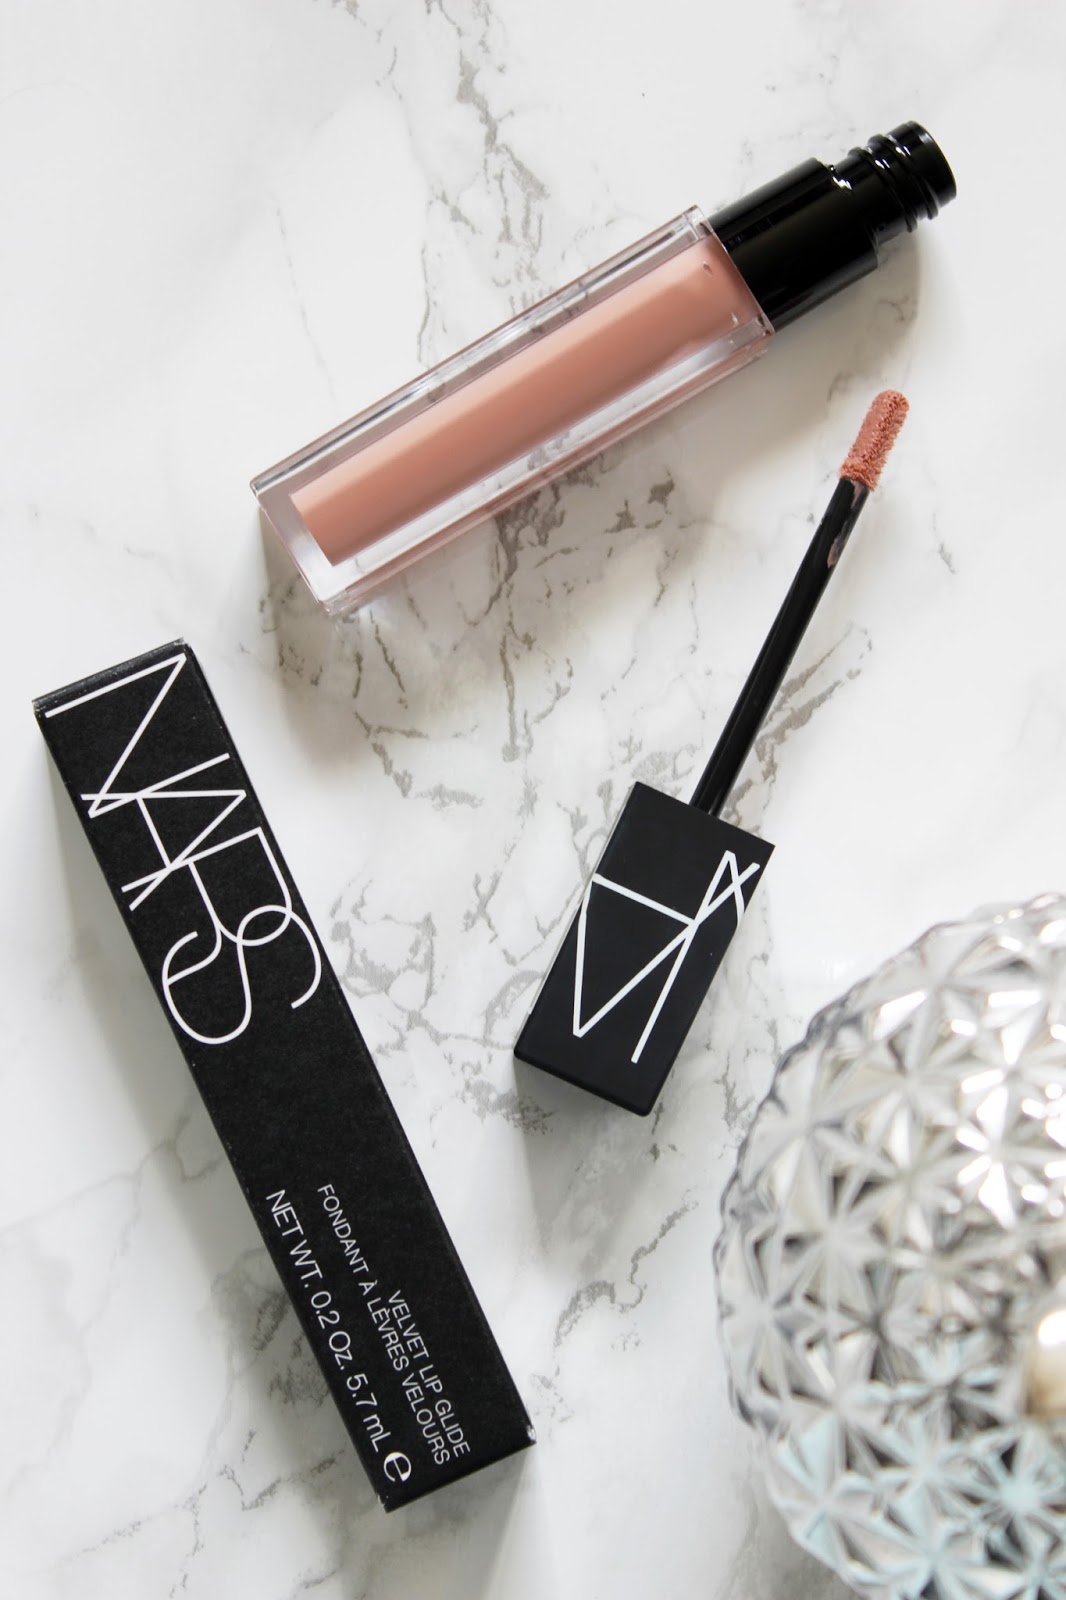 NARS Velvet Lip Glide in 'Stripped' | Review & Swatches